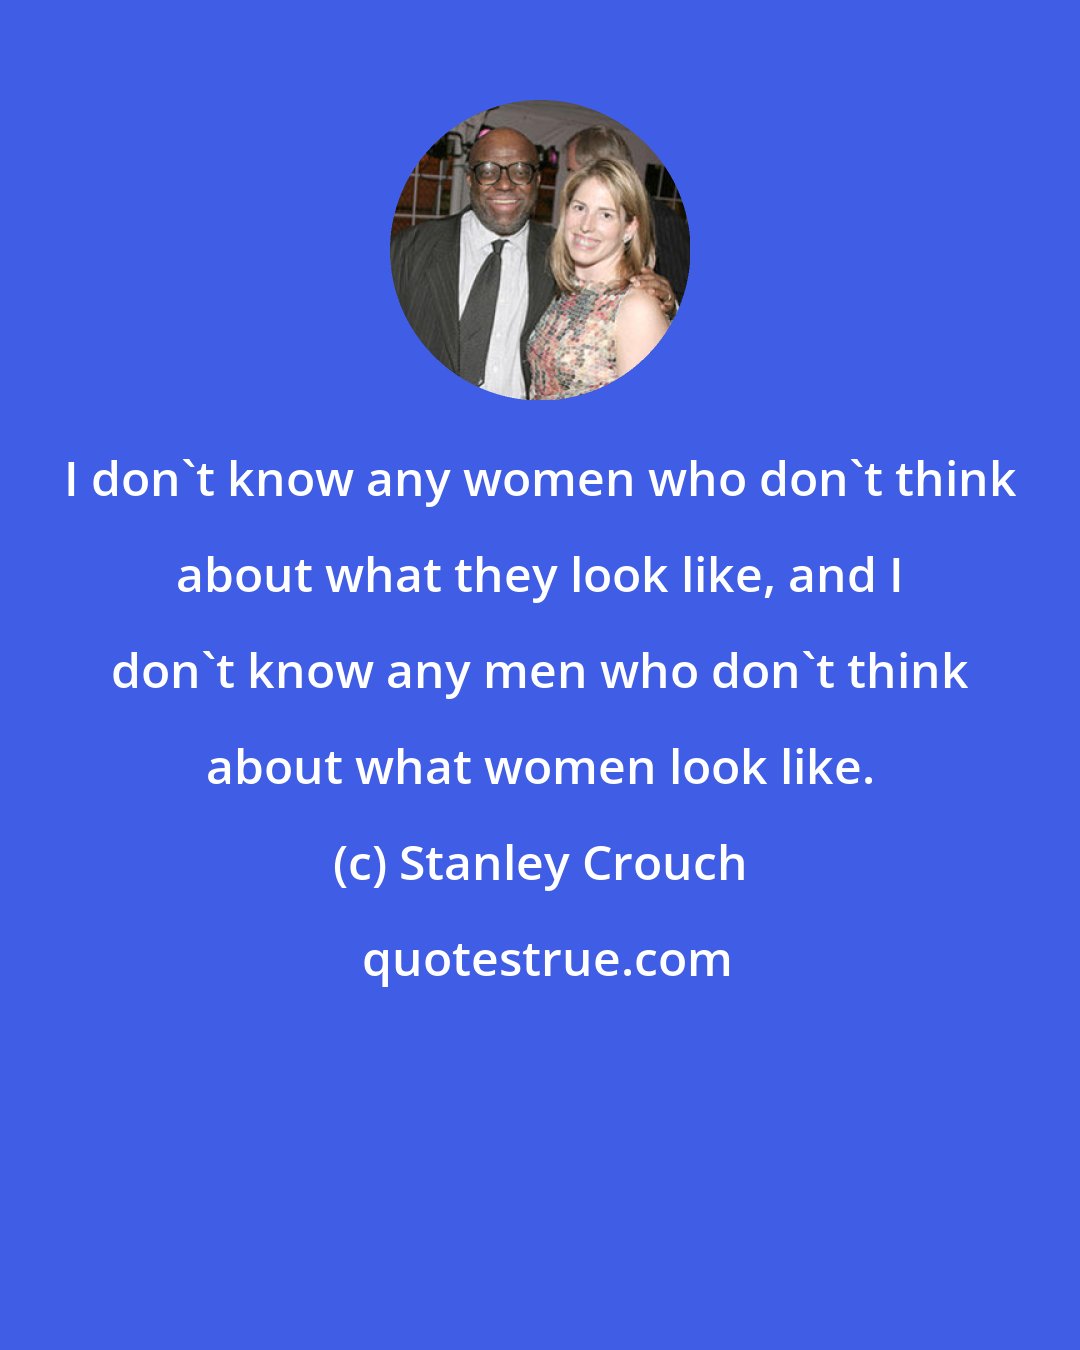 Stanley Crouch: I don't know any women who don't think about what they look like, and I don't know any men who don't think about what women look like.